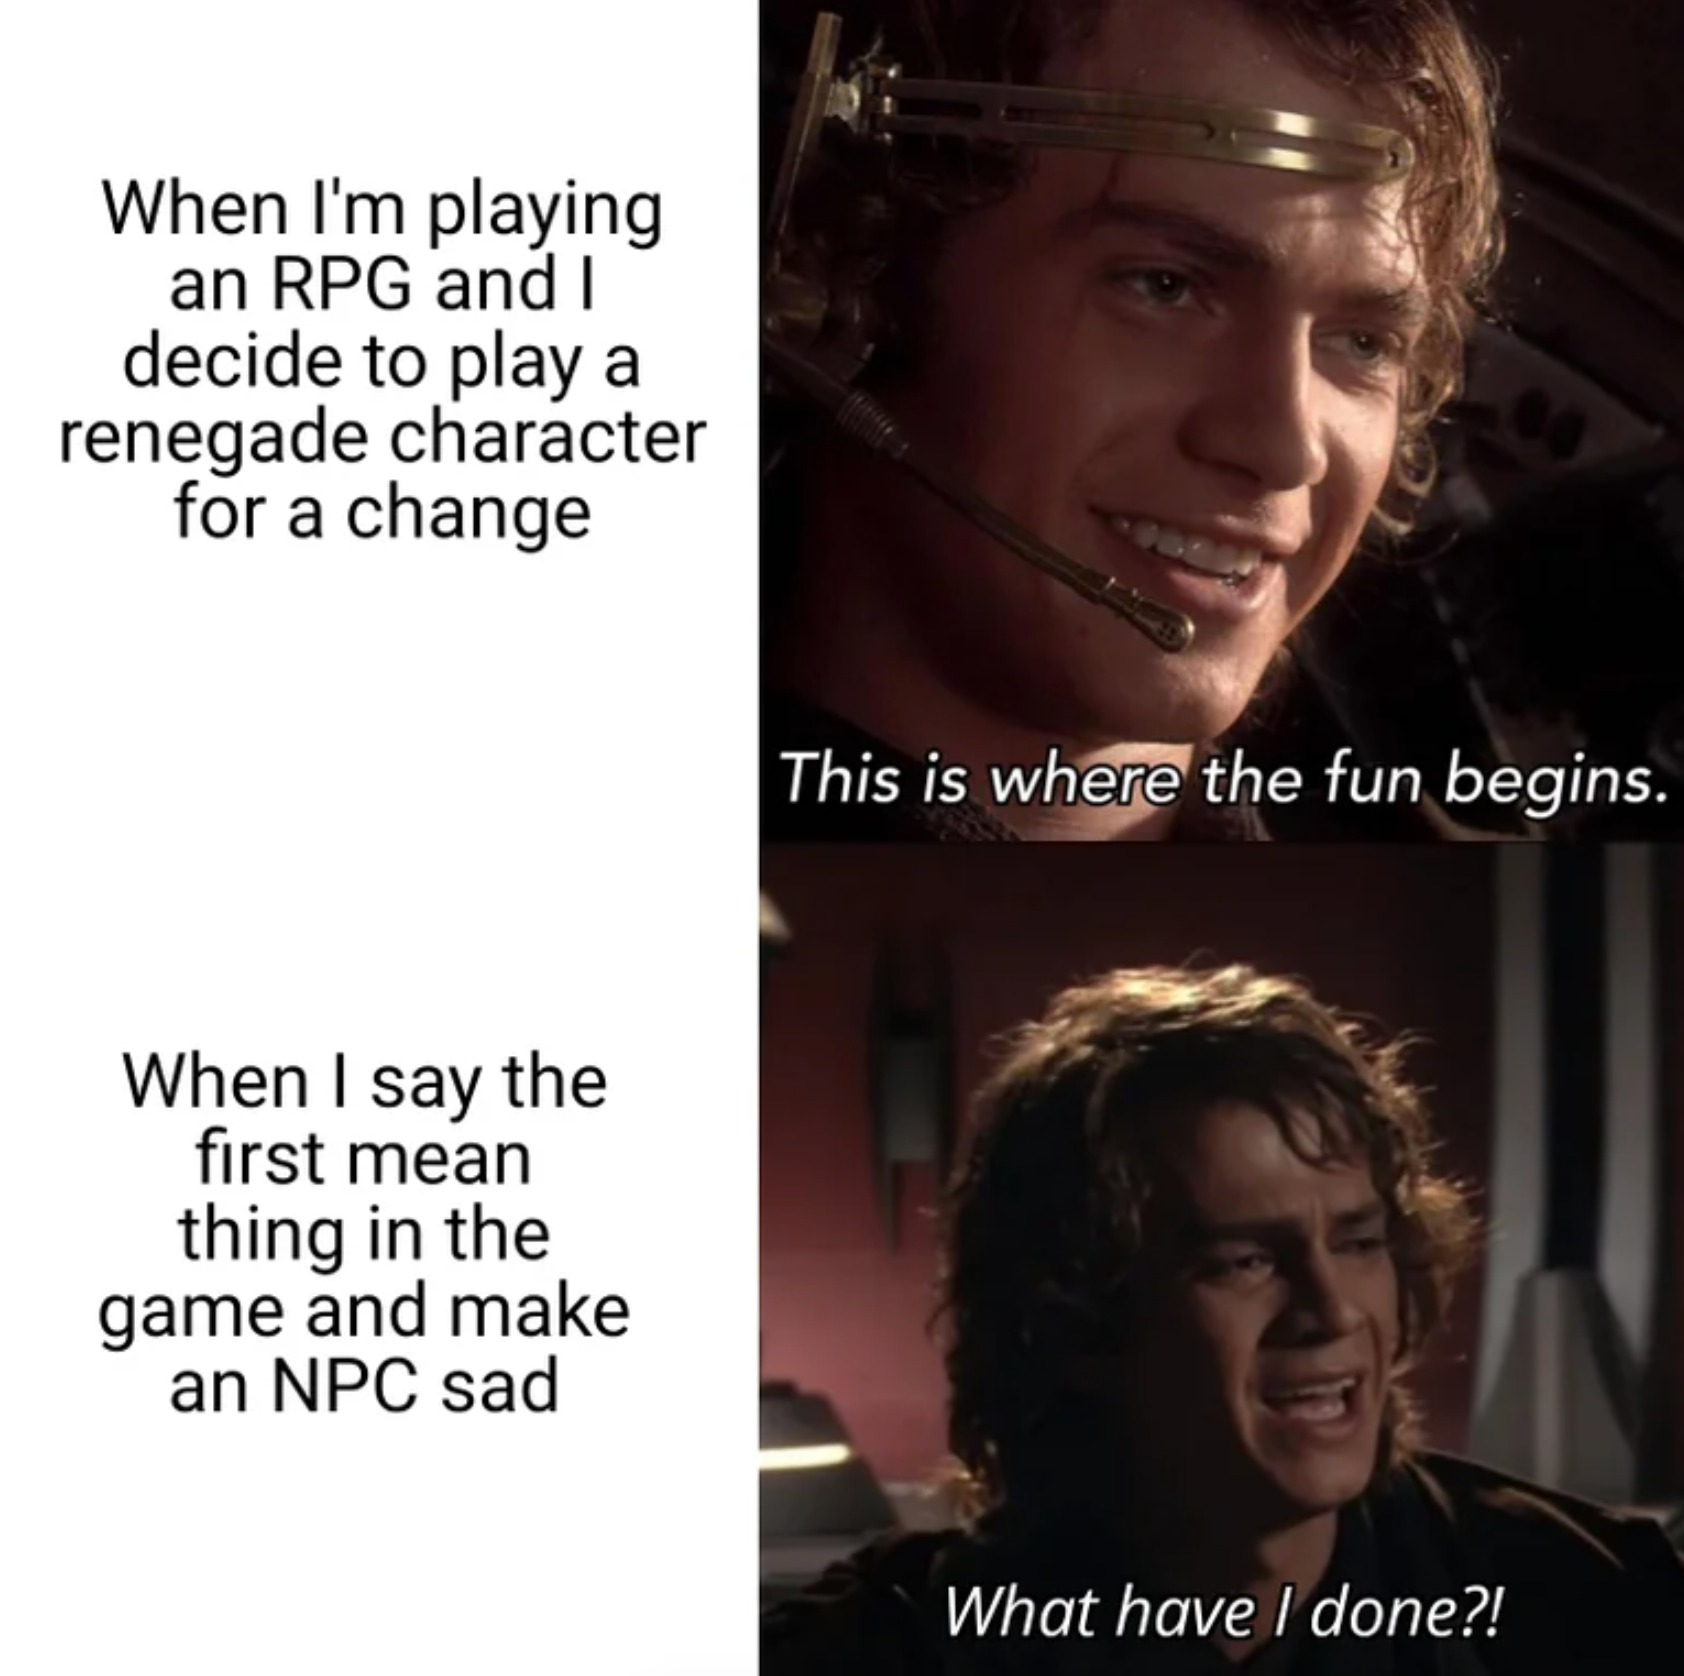 anakin skywalker jedi - When I'm playing an Rpg and I decide to play a renegade character for a change This is where the fun begins. When I say the first mean thing in the game and make an Npc sad What have I done?!